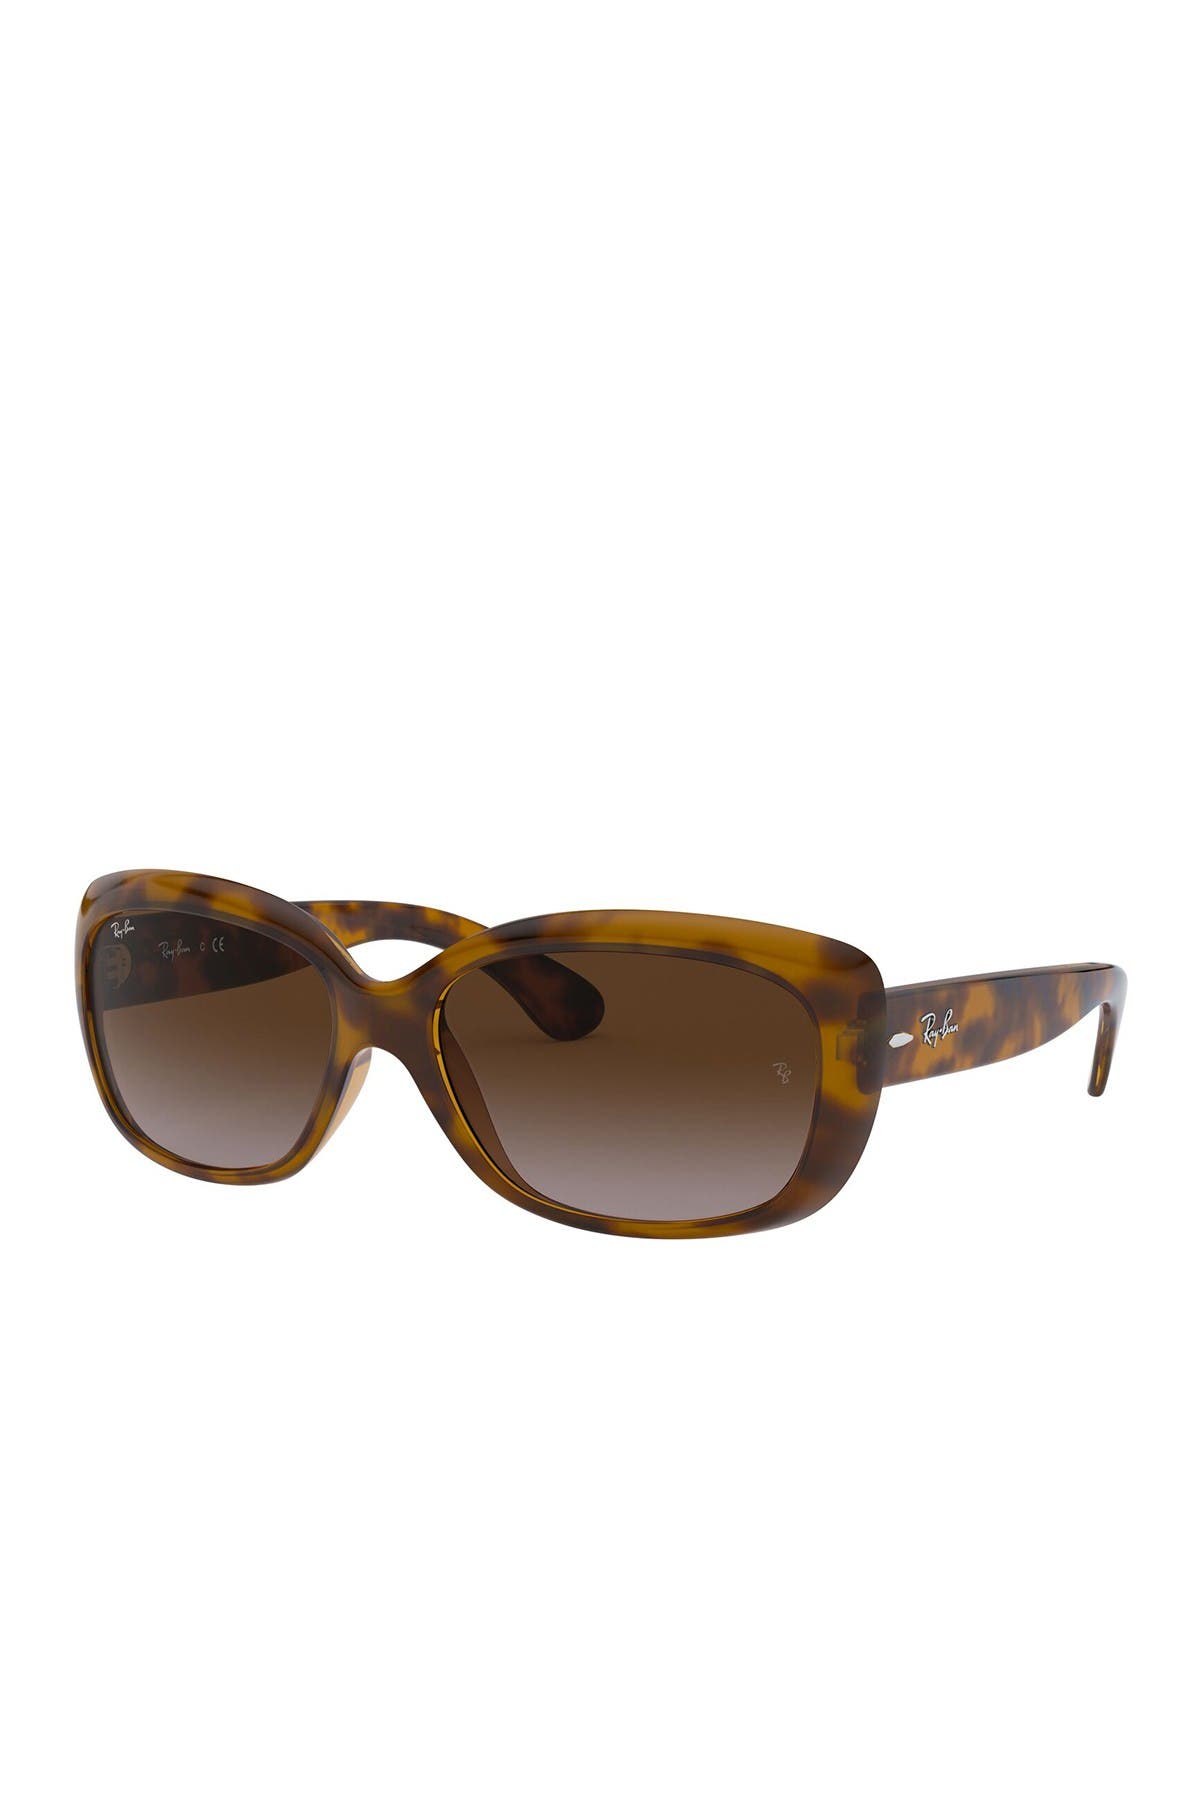 Ray-Ban | 58mm Jackie Ohh Tortoise 